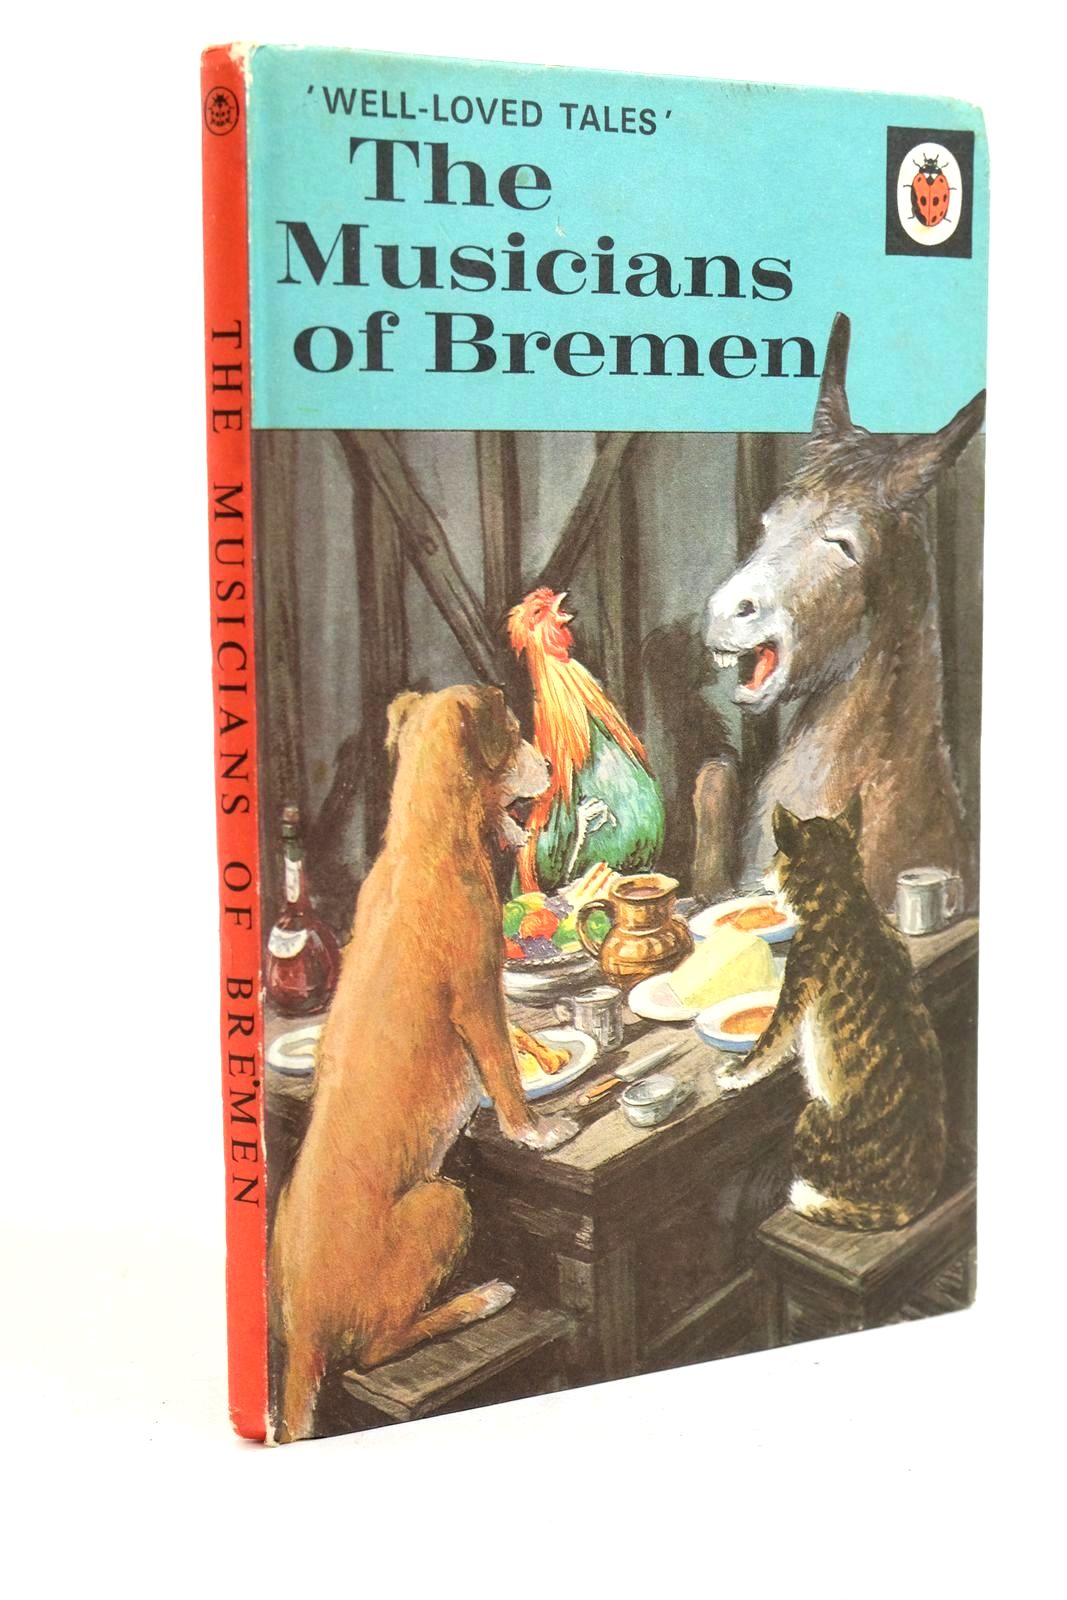 Photo of THE MUSICIANS OF BREMEN written by Southgate, Vera illustrated by Lumley, Robert Berry, John published by Ladybird Books (STOCK CODE: 1321344)  for sale by Stella & Rose's Books